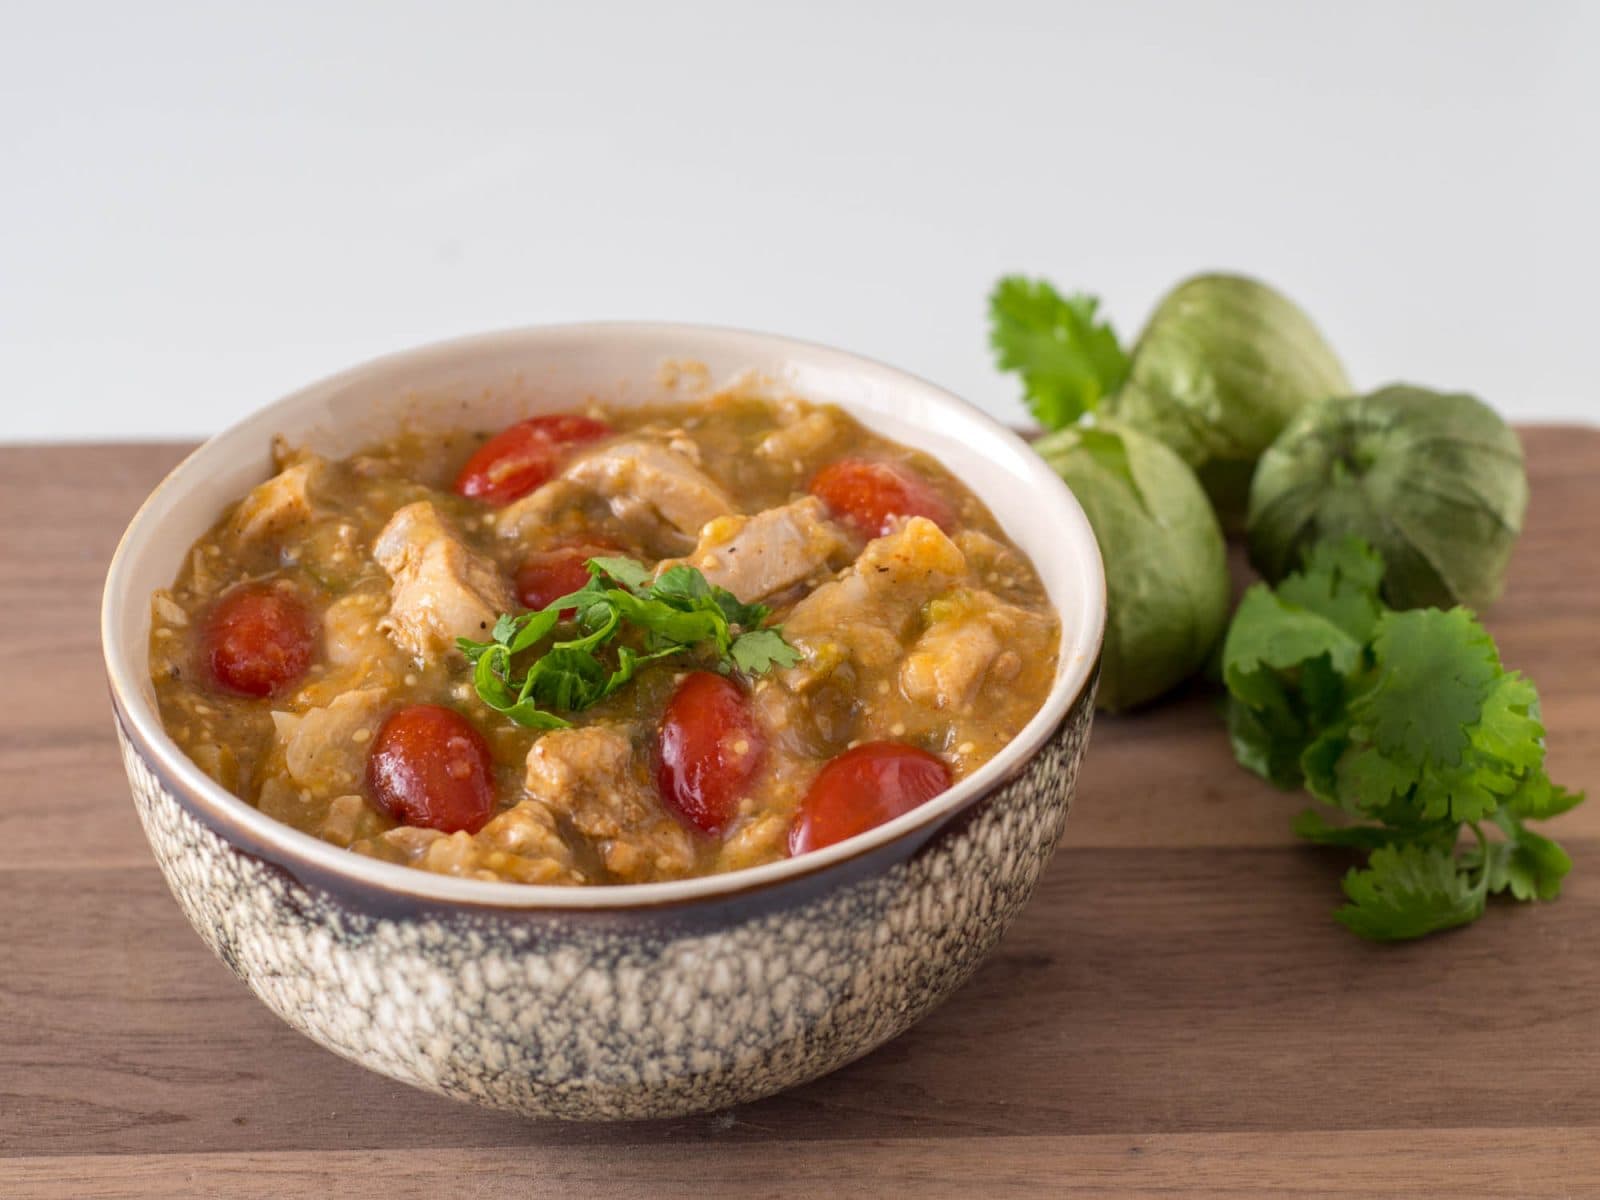 Tomatillo Chicken Stew made in the instant pot